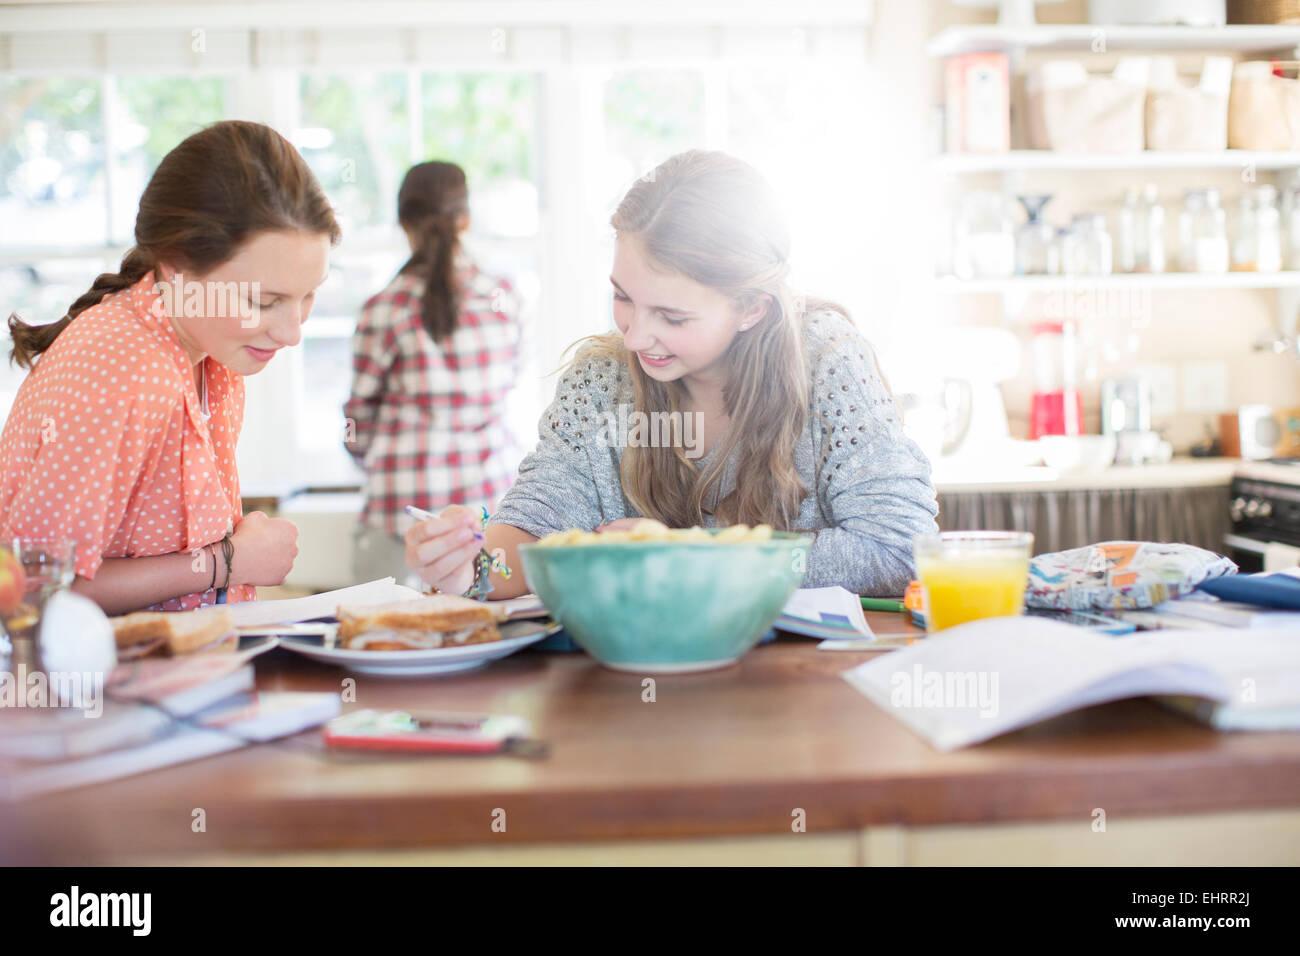 Teenage girls learning at table in kitchen Stock Photo